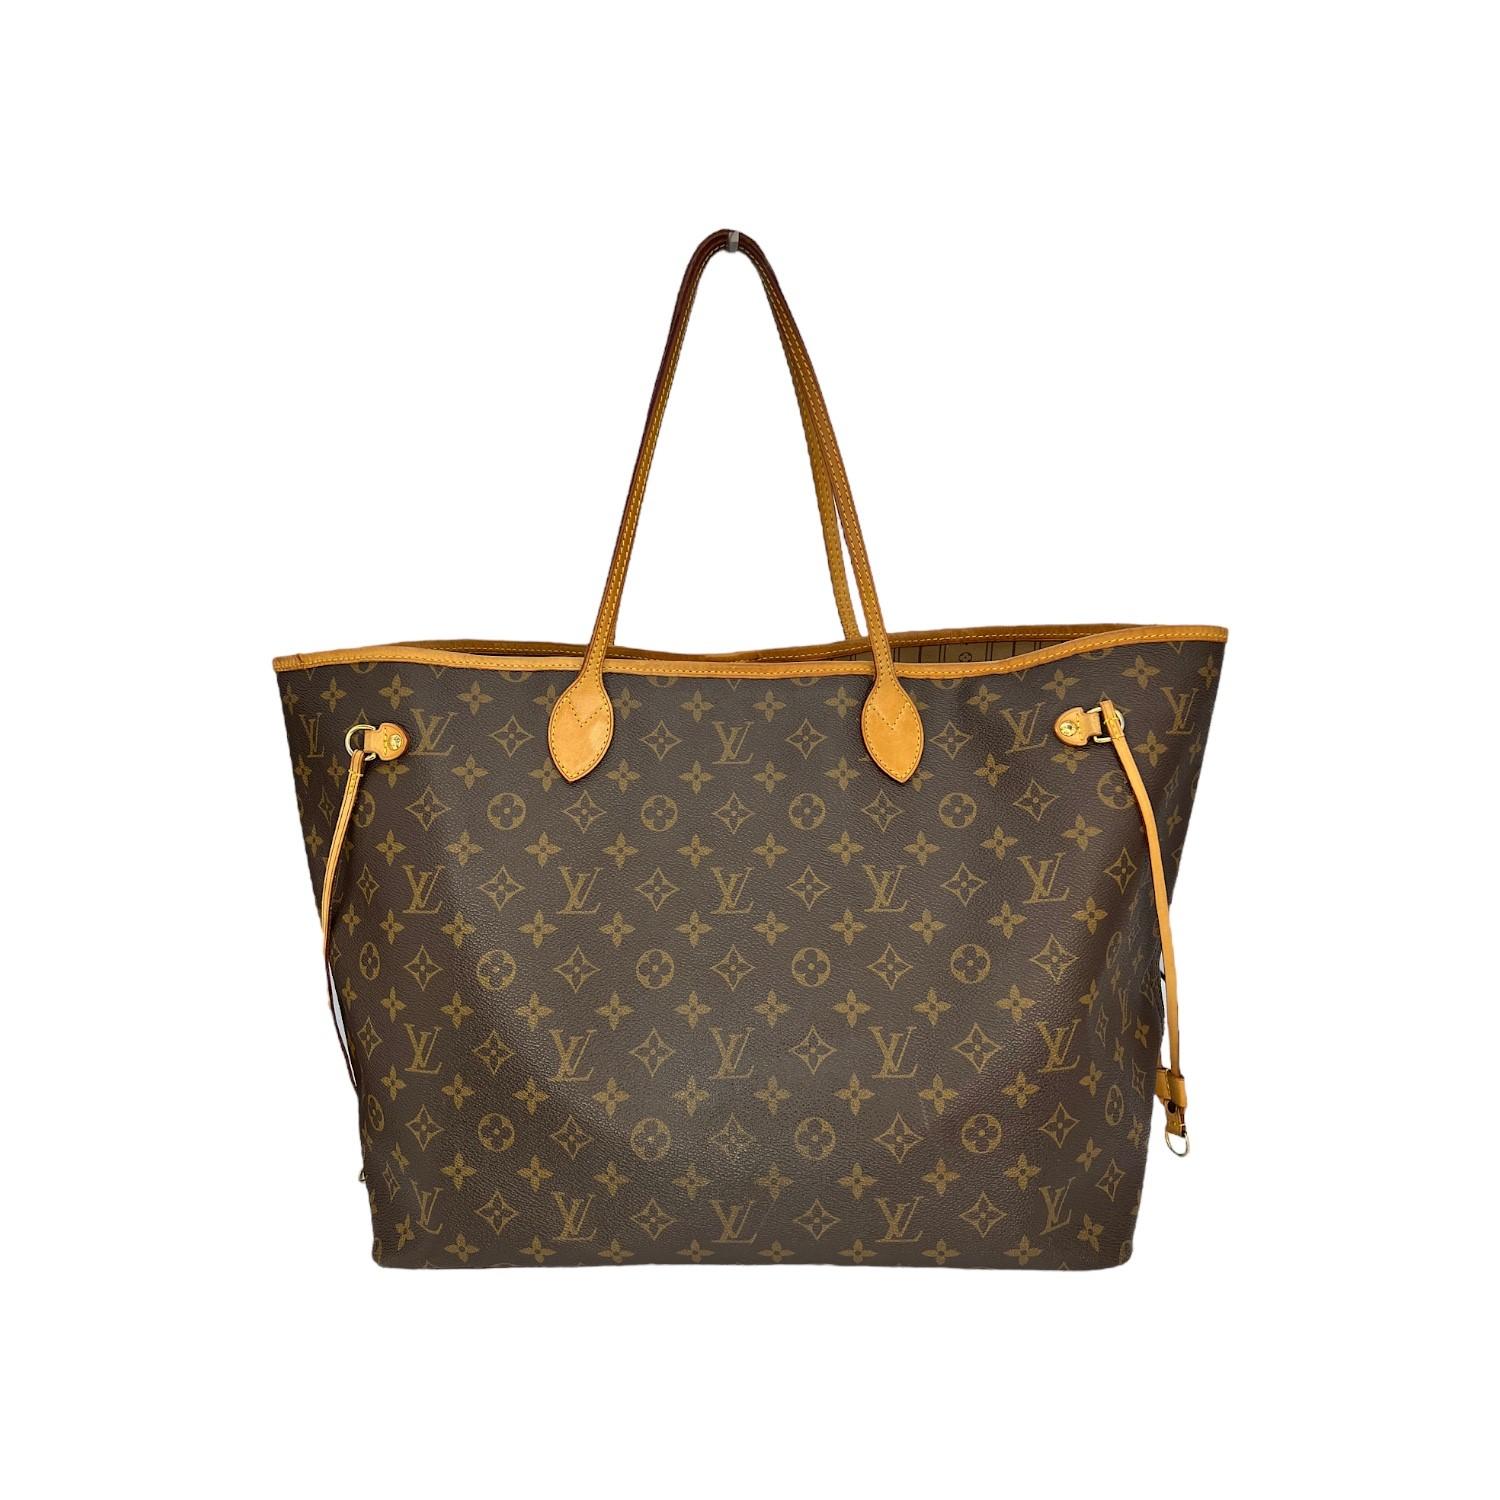 This Louis Vuitton Neverfull GM was made in France and it is finely crafted of the iconic Louis Vuitton Monogram coated canvas with leather trimming and gold-tone hardware features. It has dual flat leather shoulder straps. It has a clasp closure on